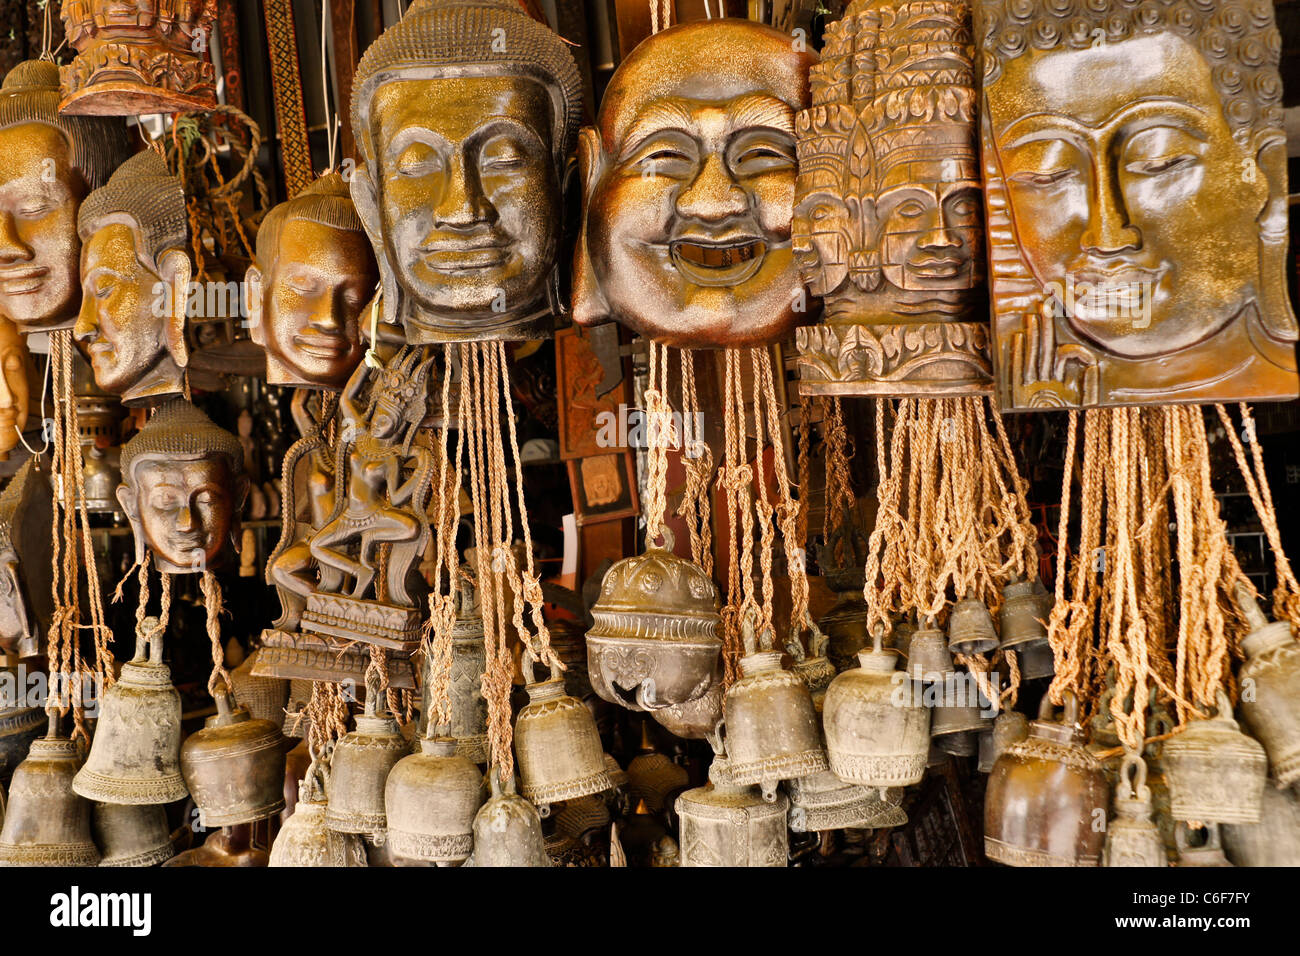 Cambodia Handicrafts High Resolution Stock Photography and Images - Alamy